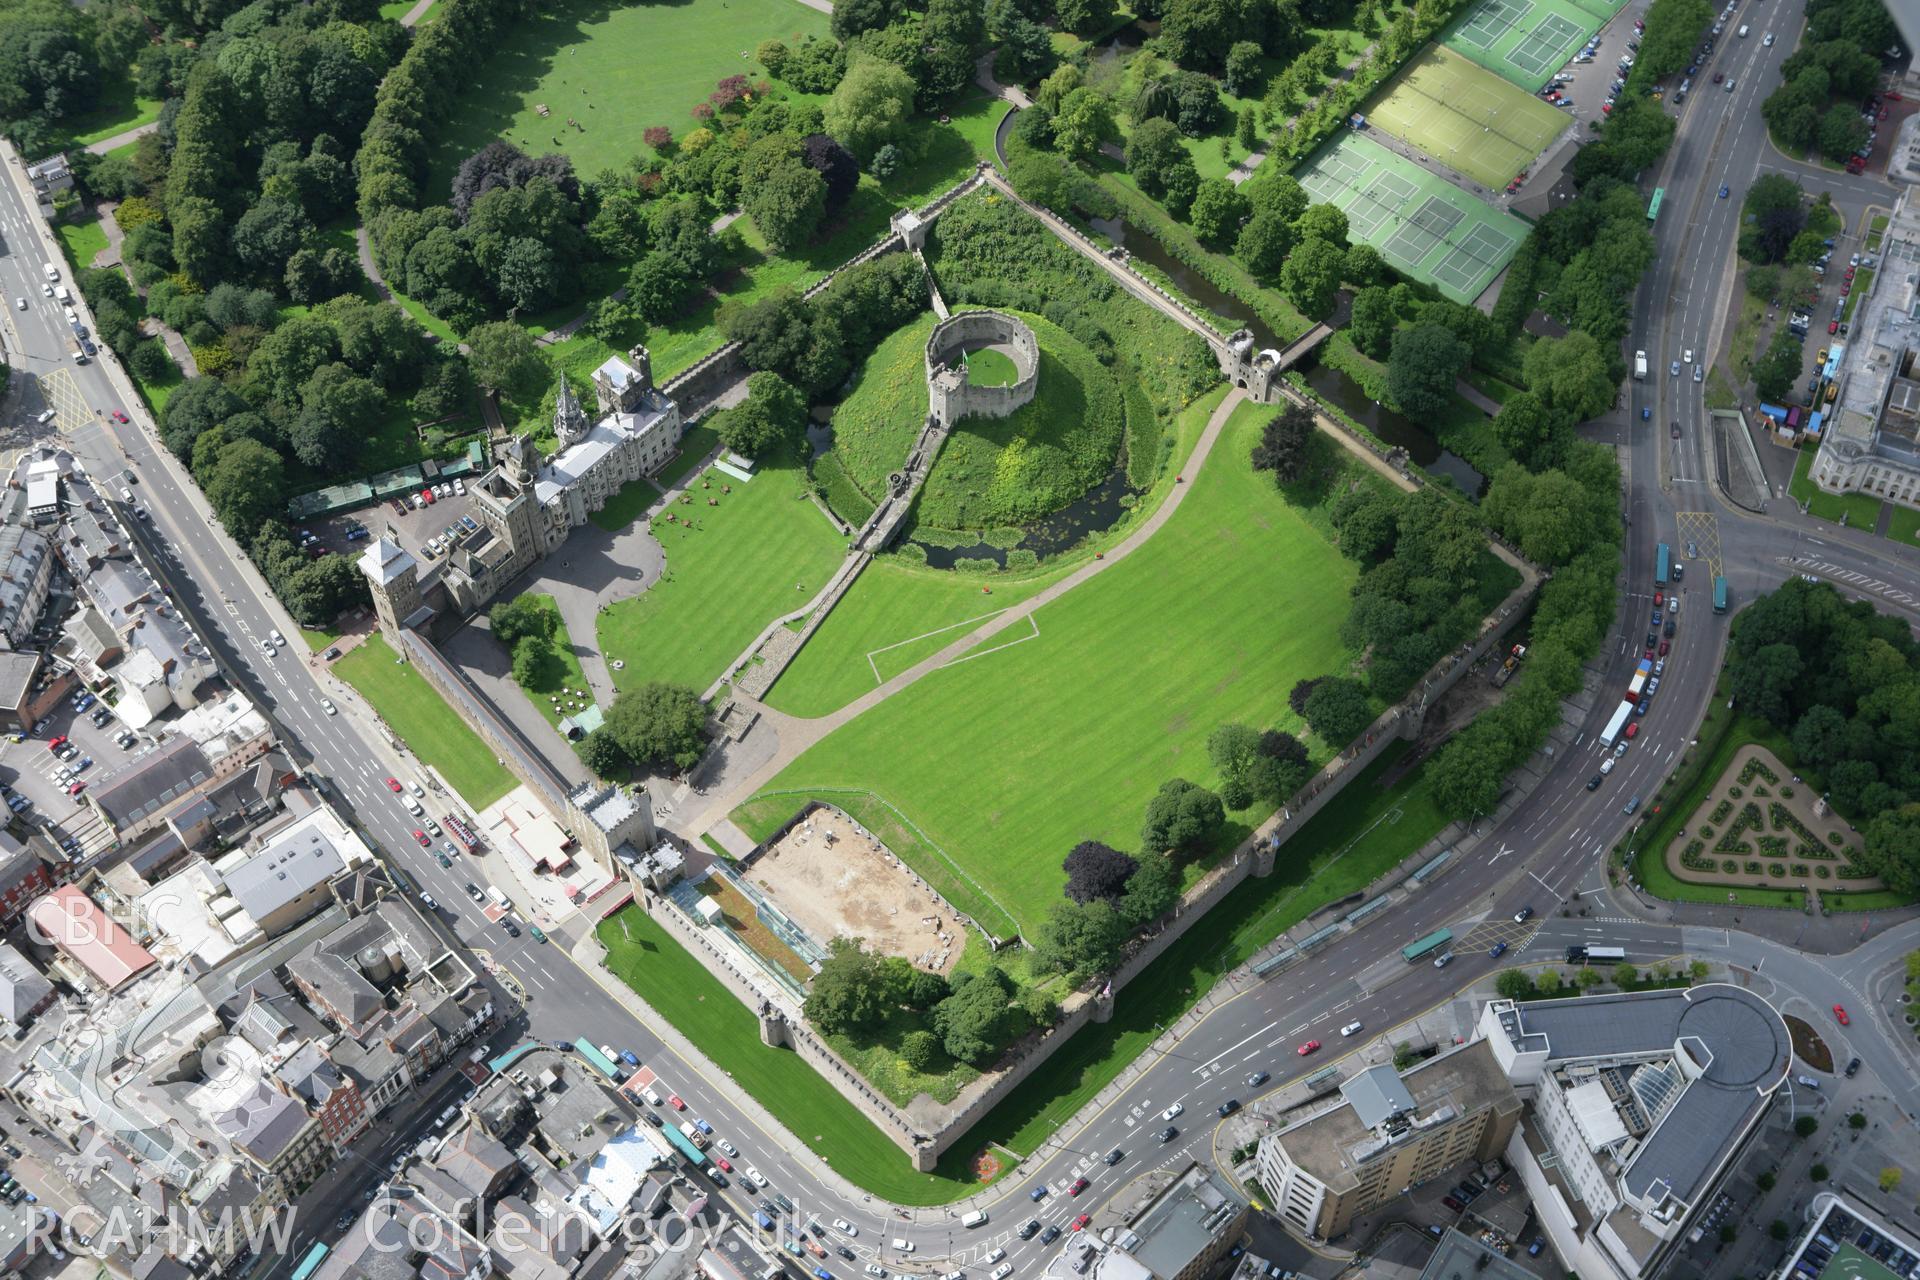 RCAHMW colour oblique aerial photograph of Cardiff Castle. Taken on 30 July 2007 by Toby Driver